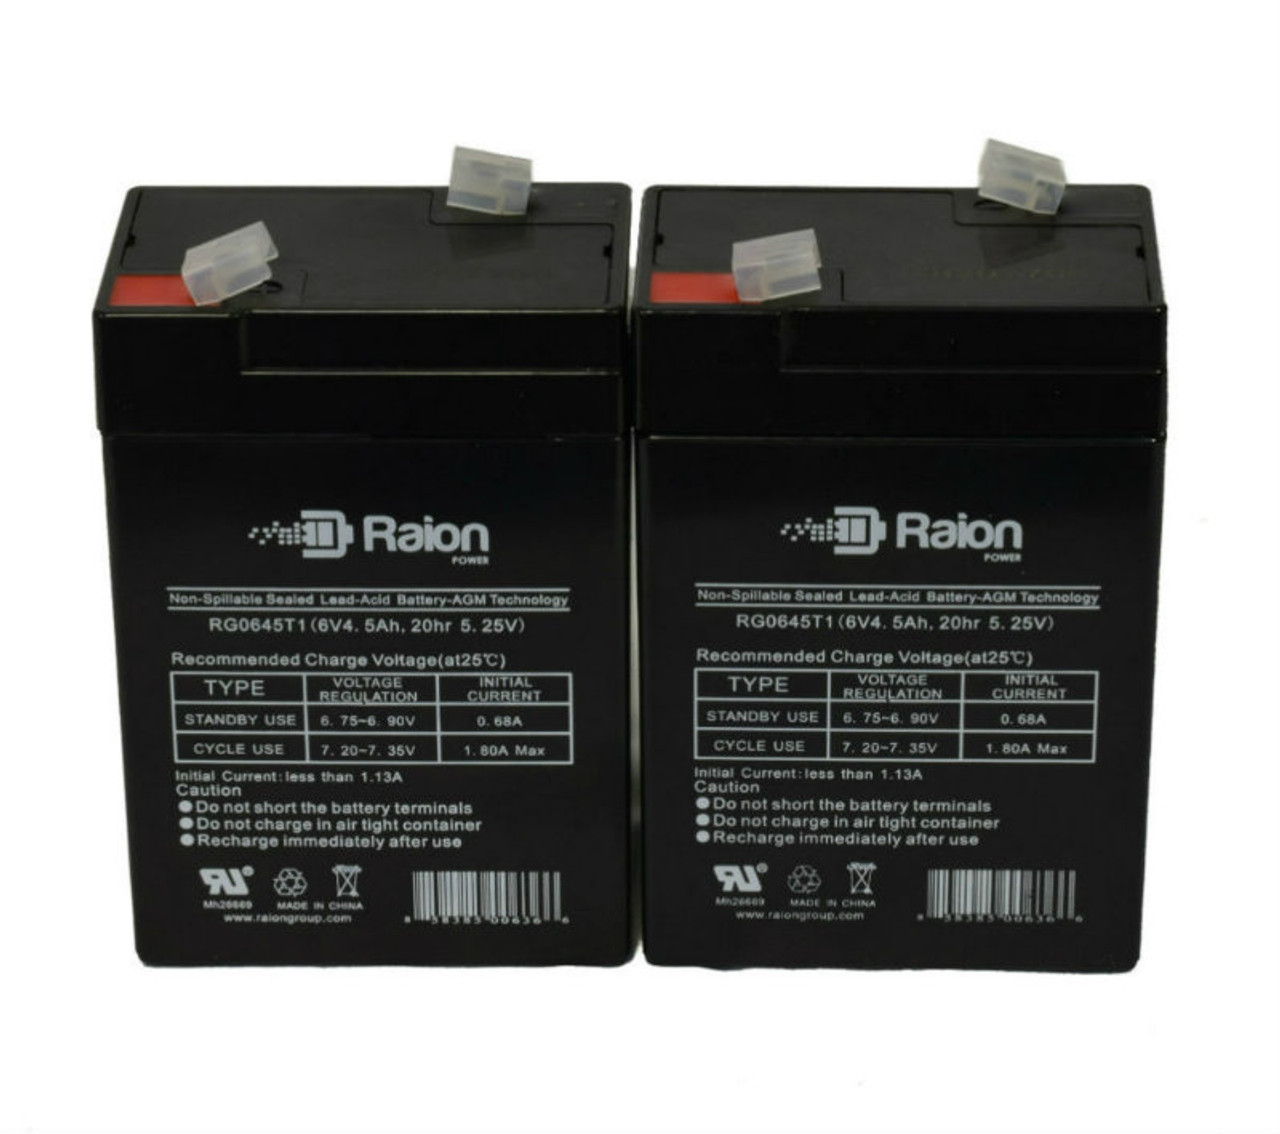 Raion Power 6 Volt 4.5Ah RG0645T1 Replacement Battery for Multipower MP4.5-6 - 2 Pack